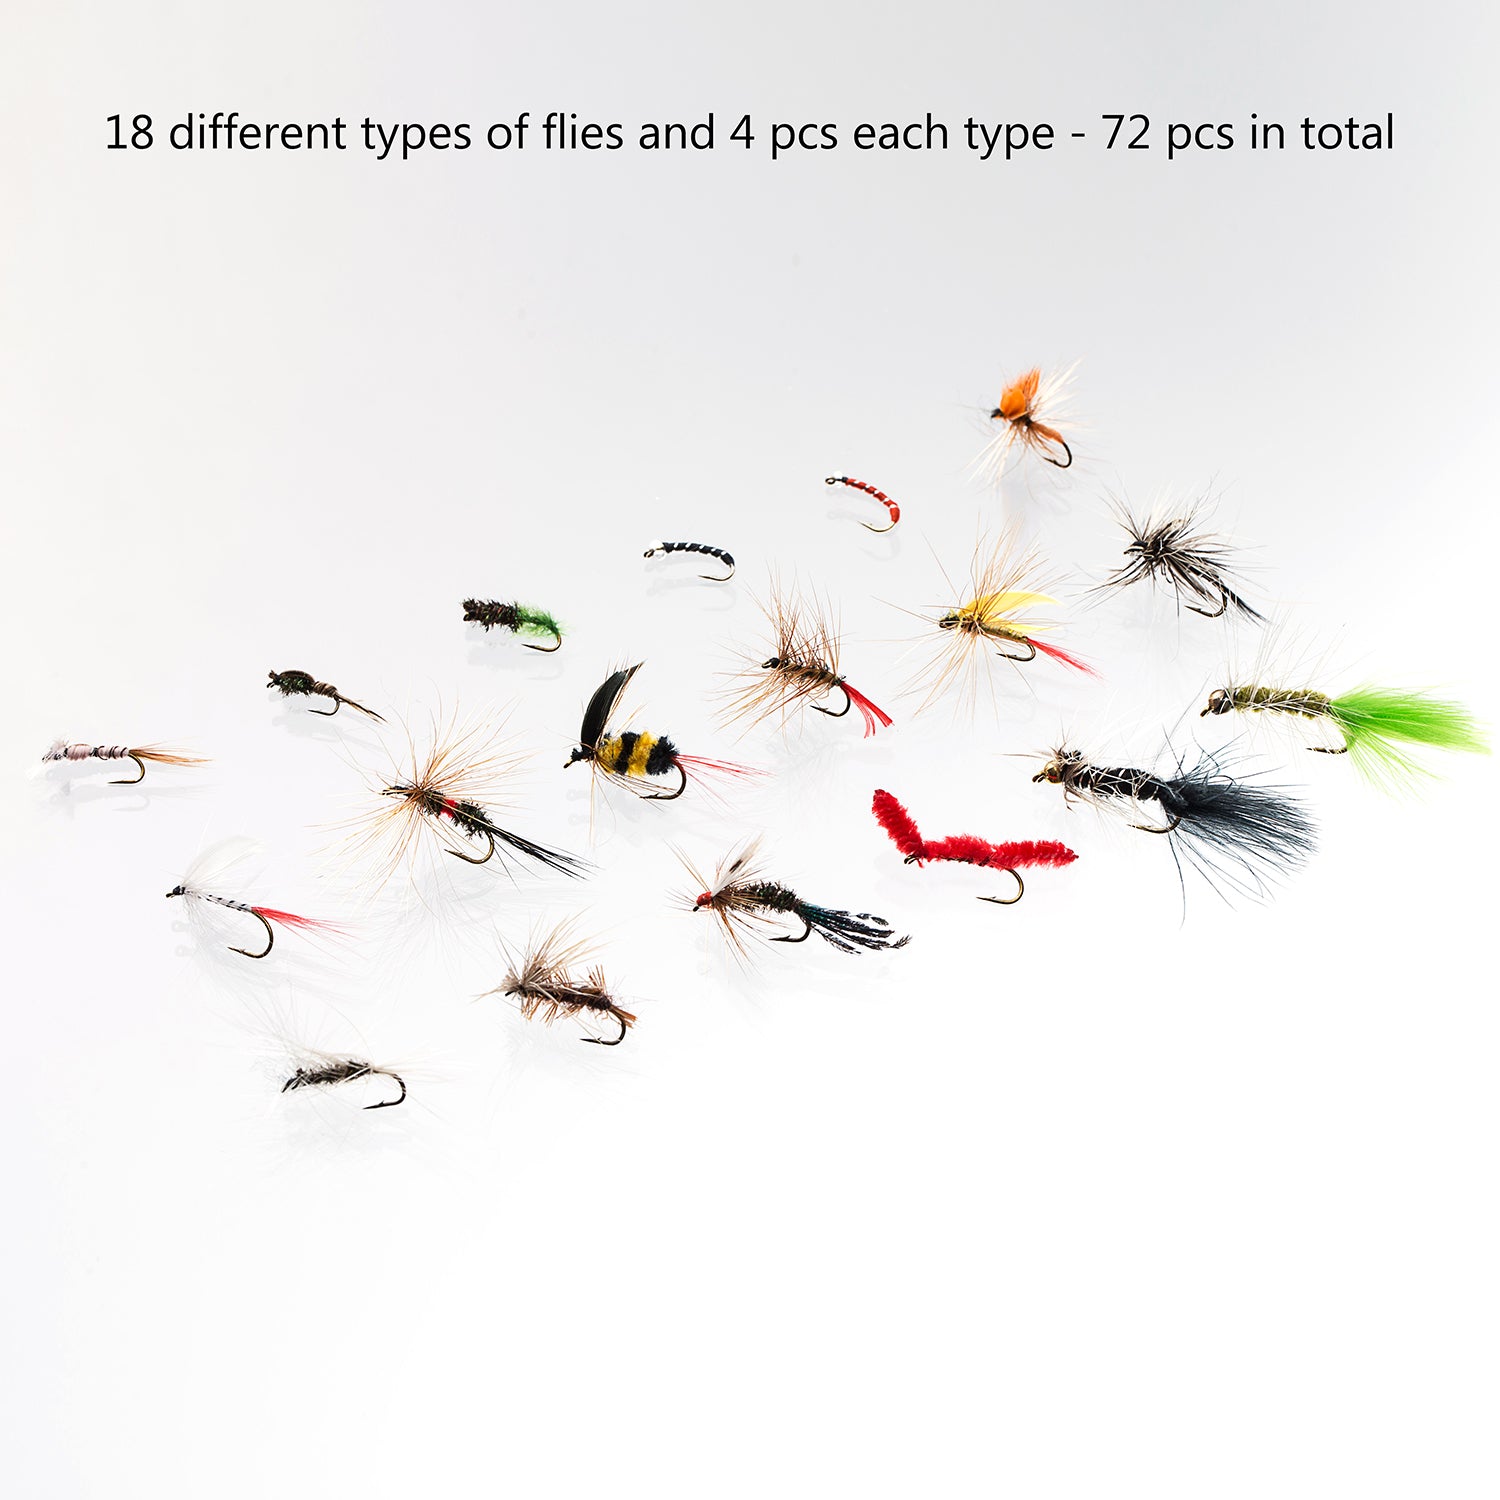 137pieces/box Flies For Fly Fishing, Dry/wet Fly Fishing Lures